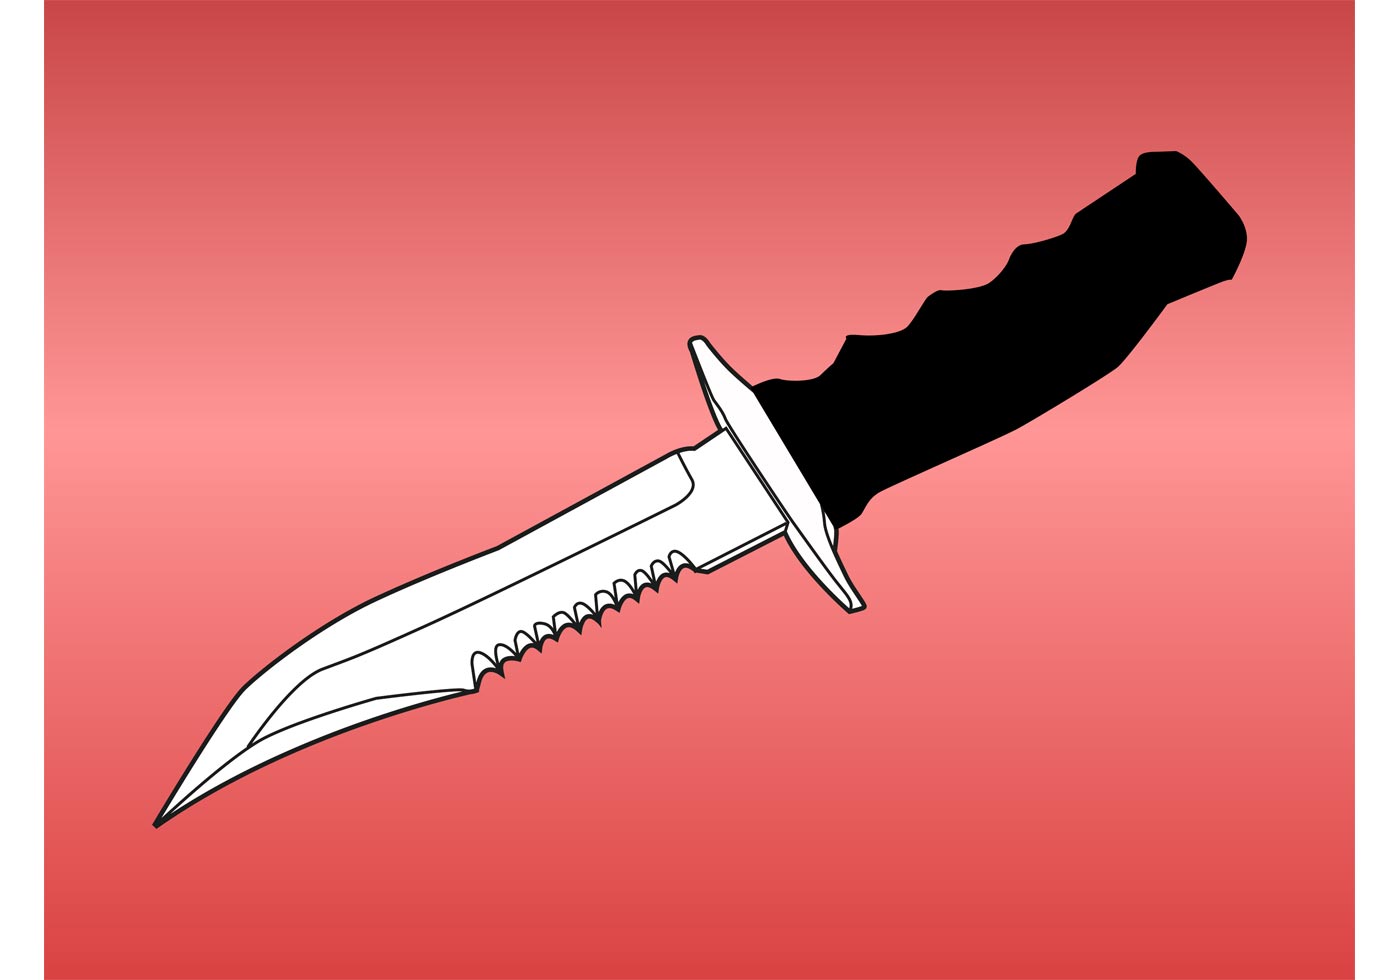 Knife Graphics - Download Free Vector Art, Stock Graphics & Images